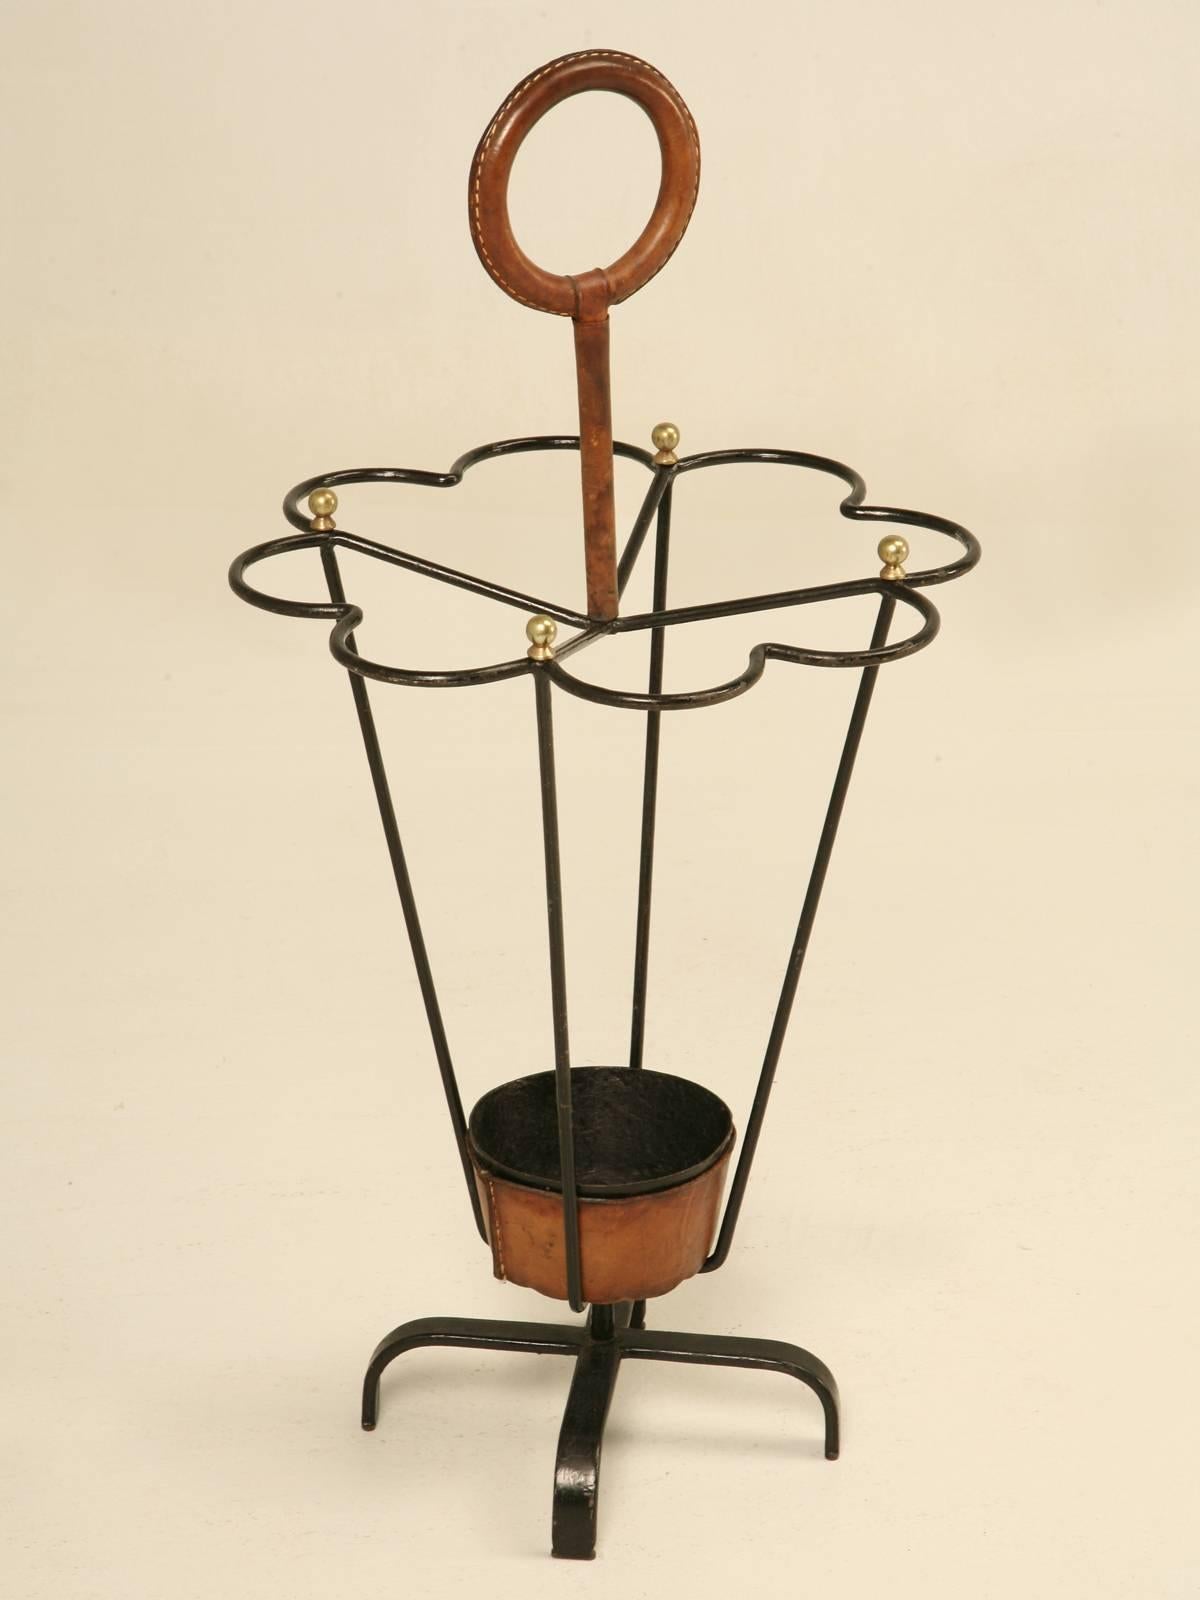 Original Jacques Adnet Leather Wrapped Umbrella Stand or Stick Stand.
Jacques Adnet was an iconic figure in French Modernism. He believed in function of the furniture blended with geometrical simplicity. In the 1950s he created furniture and